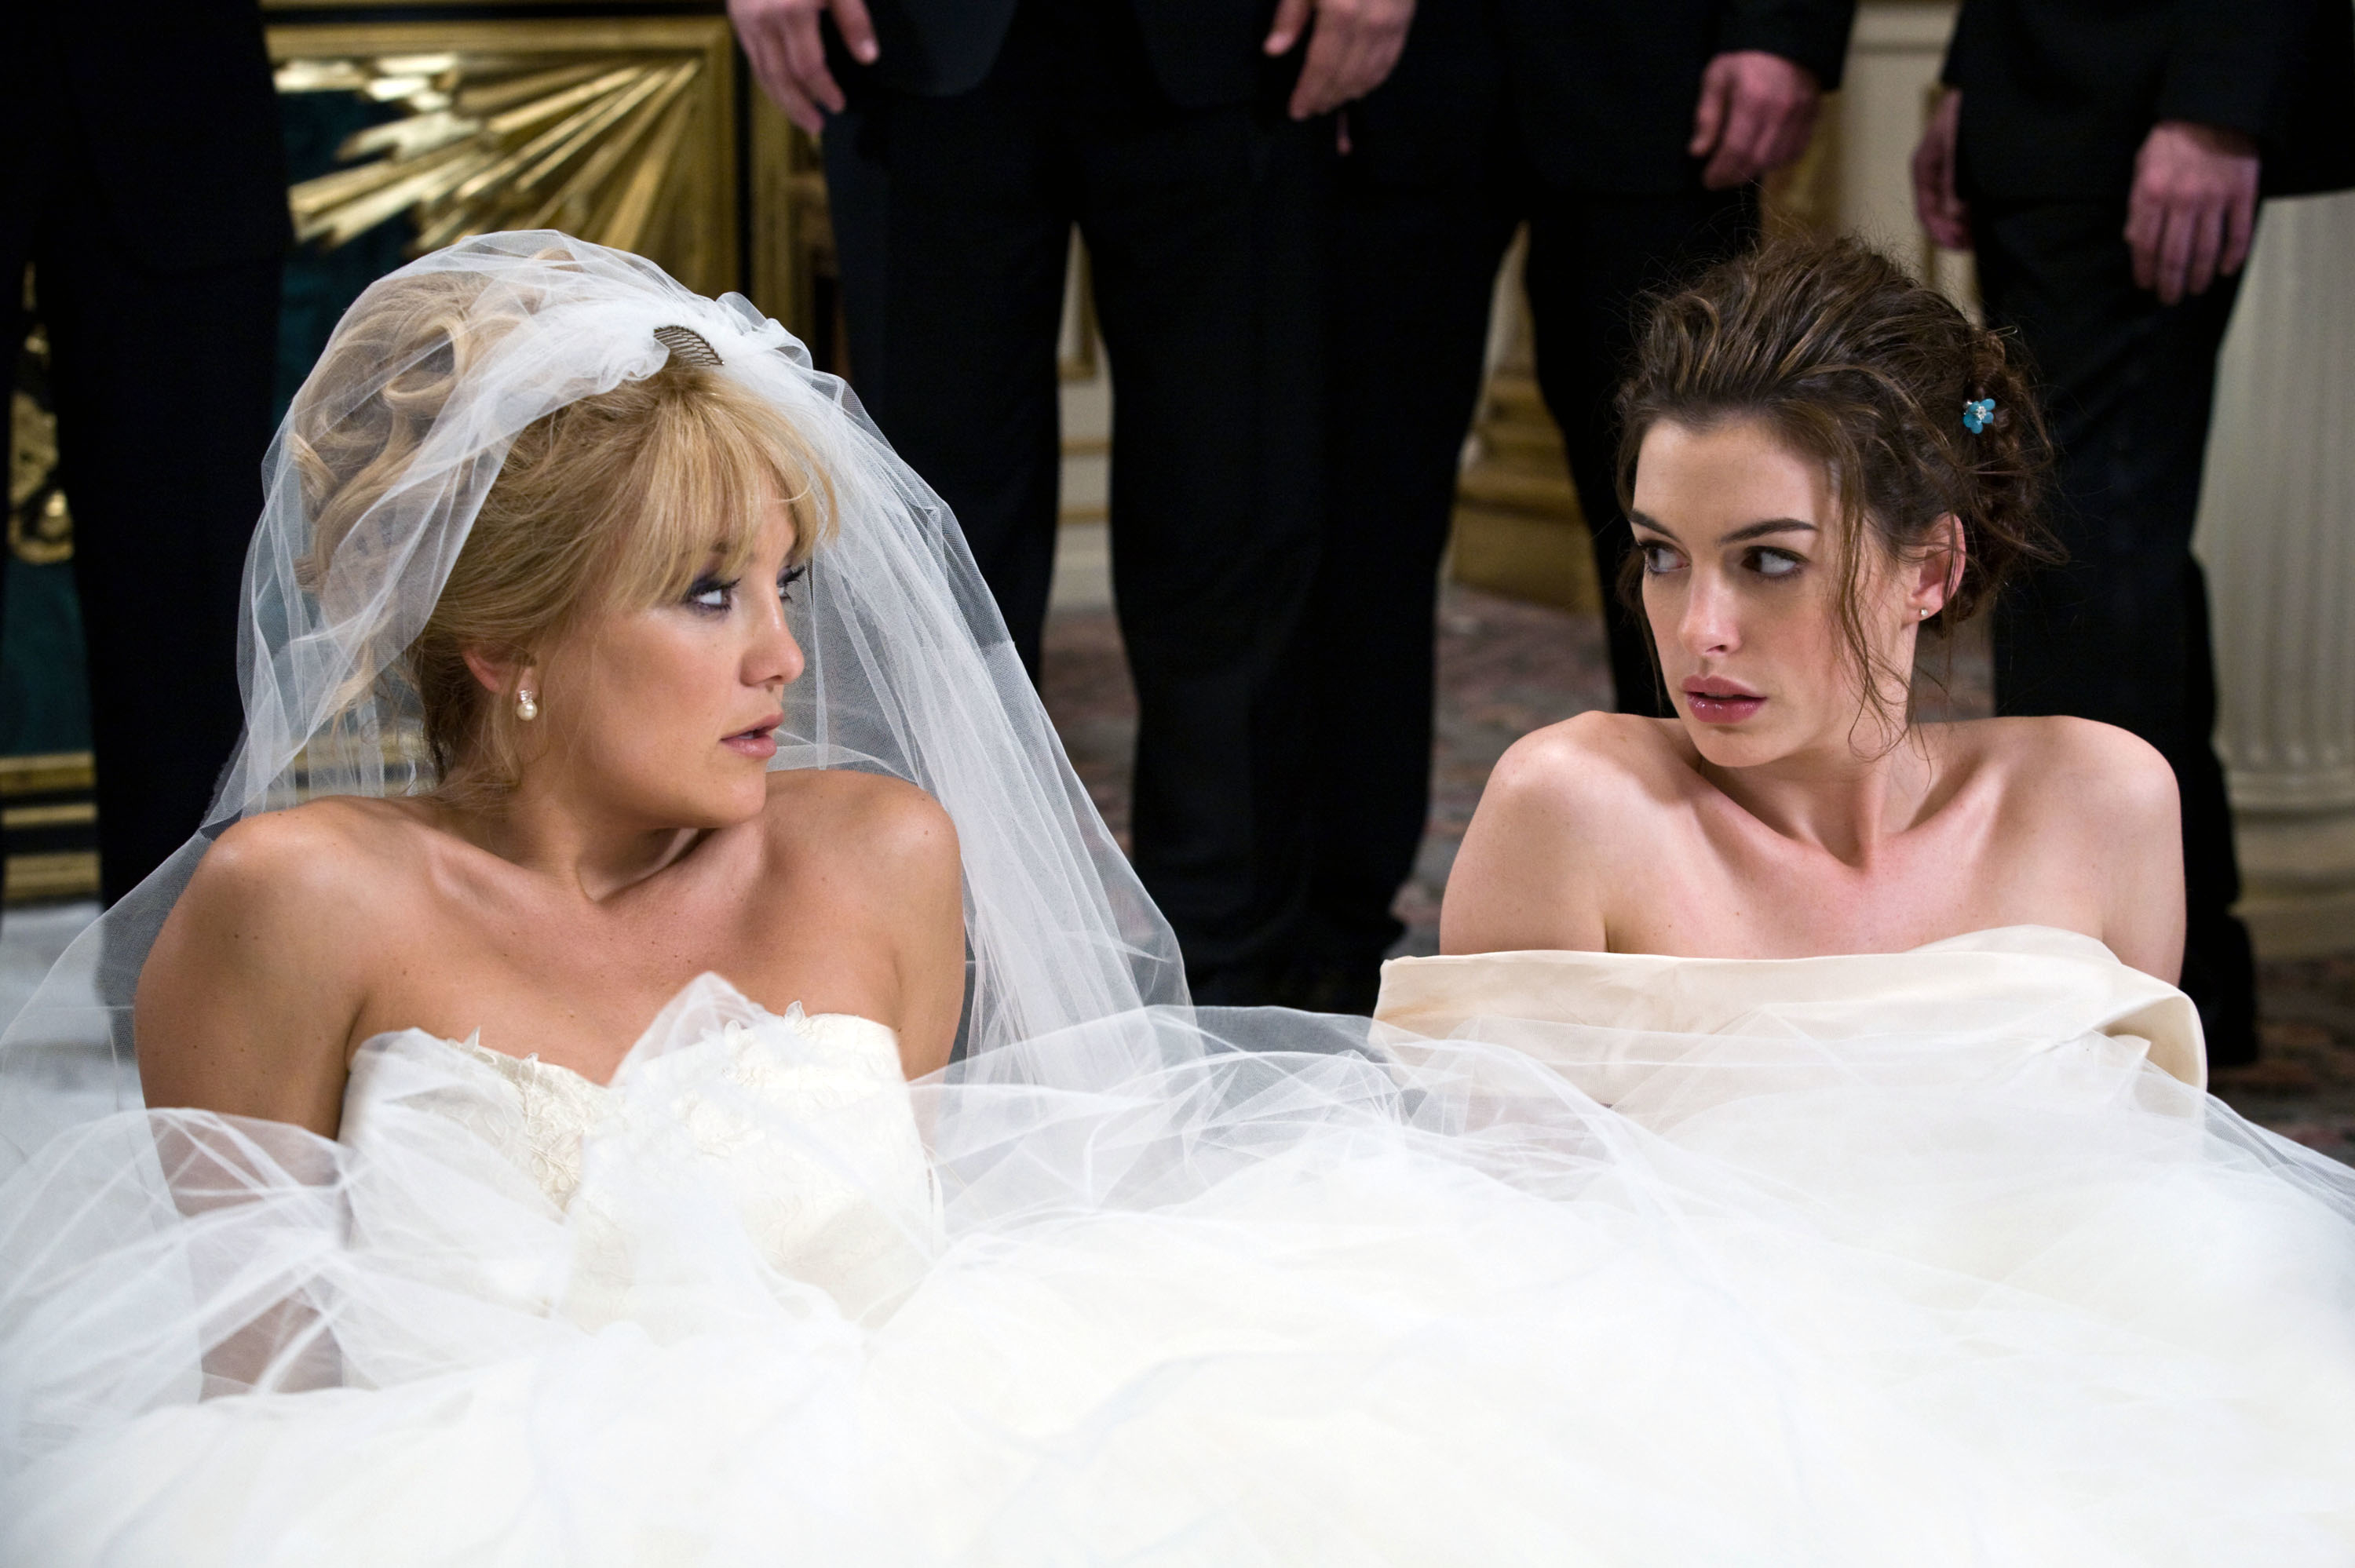 Kate Hudson and Anne Hathaway seated side by side look at each other, one in a veil and the other bare-shouldered